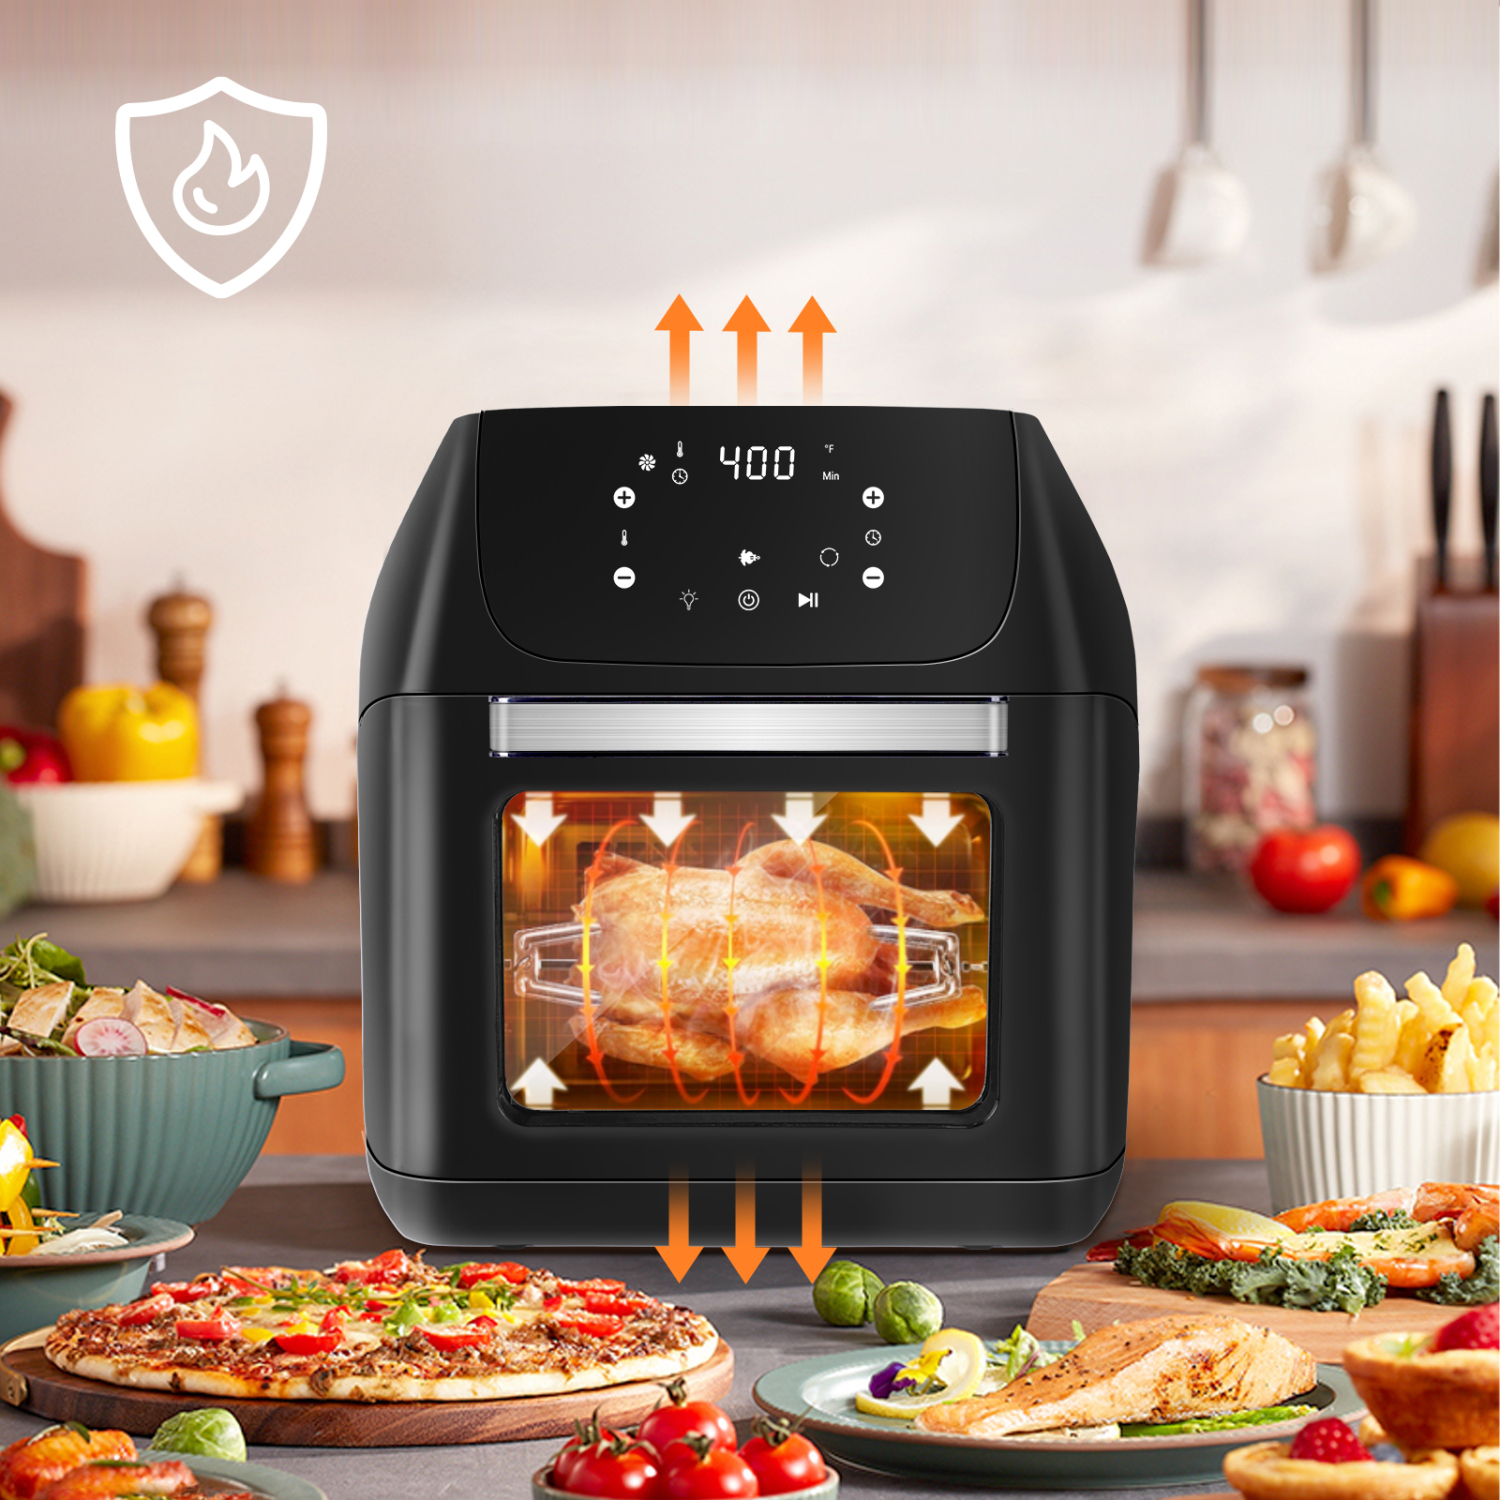 Aigostar 10-in-1 Air Fryer Oven, 13 QT Air Fryer with Rotisserie, Dehydrator, Convection Oven, Removable Door and Smart One Touch Cooking, 6 Accessories, 1500W Family Size Air Fryer Oven Combo, Black